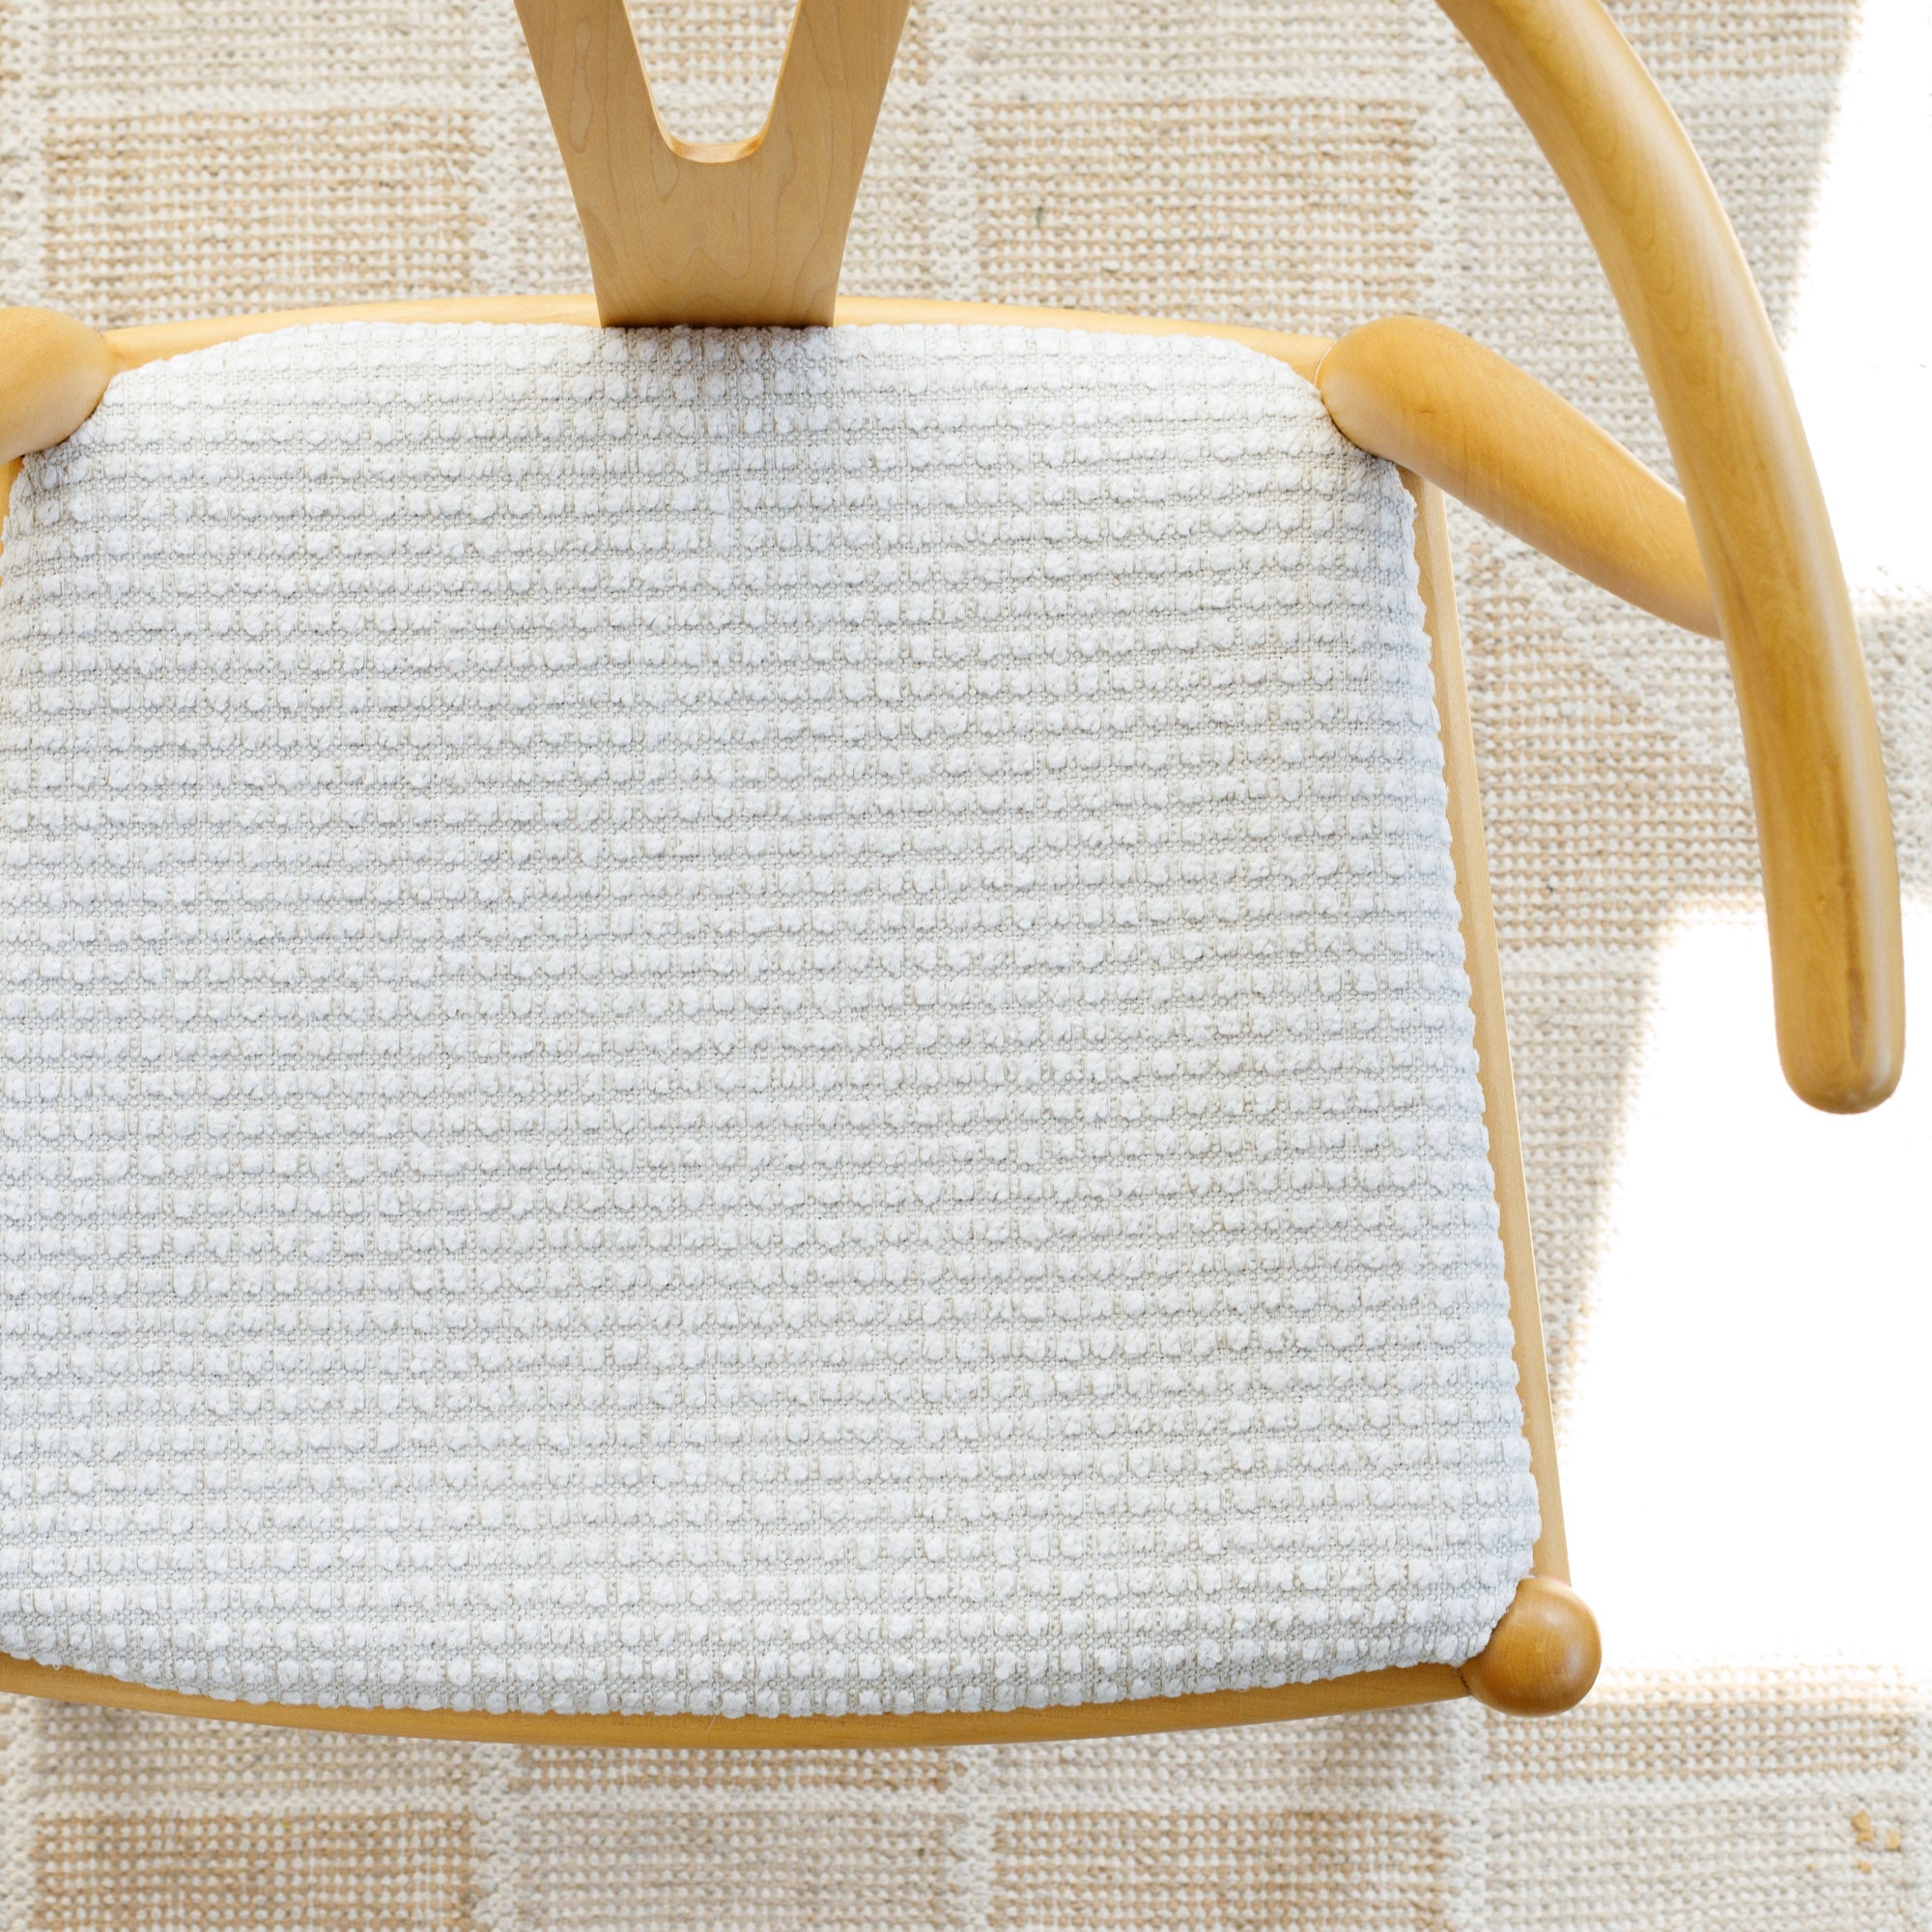 a creamy white textured grid patterned high performance upholstered chair seat